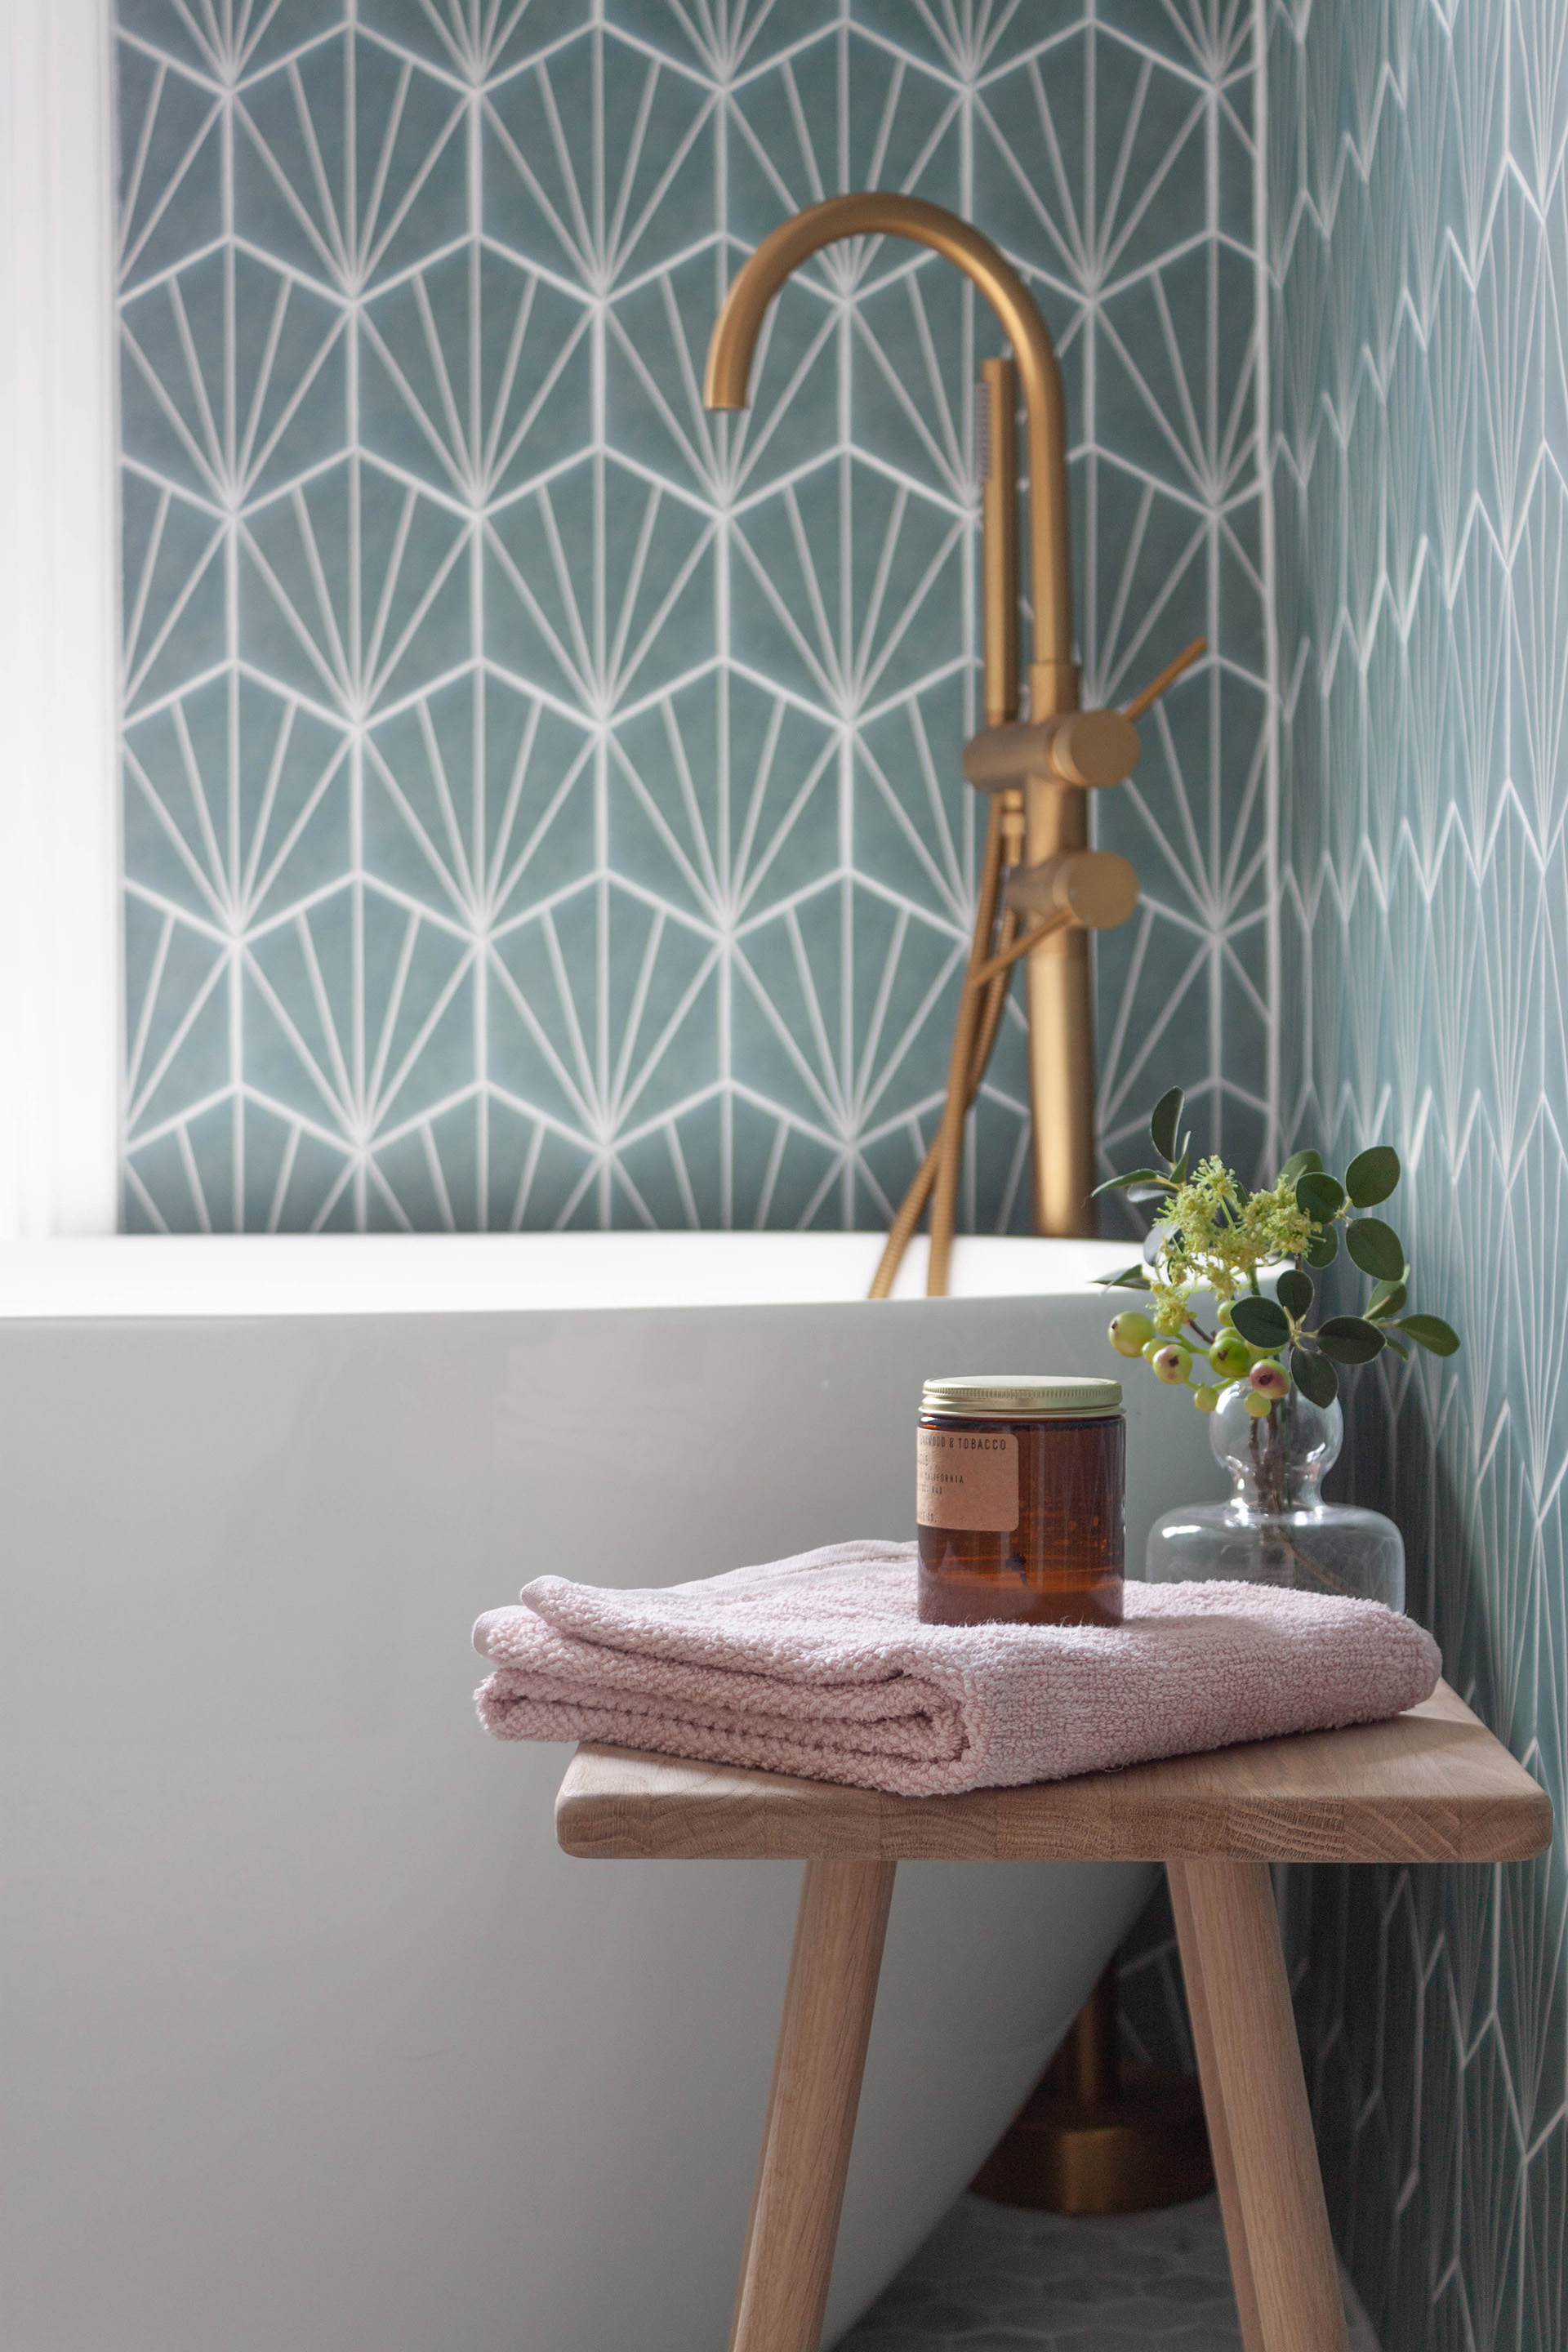 A snapshot of a wetroom area in a small victorian bathroom in Leamington Spa. Showing Hexagonal teal wall tiles, an elegant white freestanding bath and a brushed gold floorstanding bath filler.